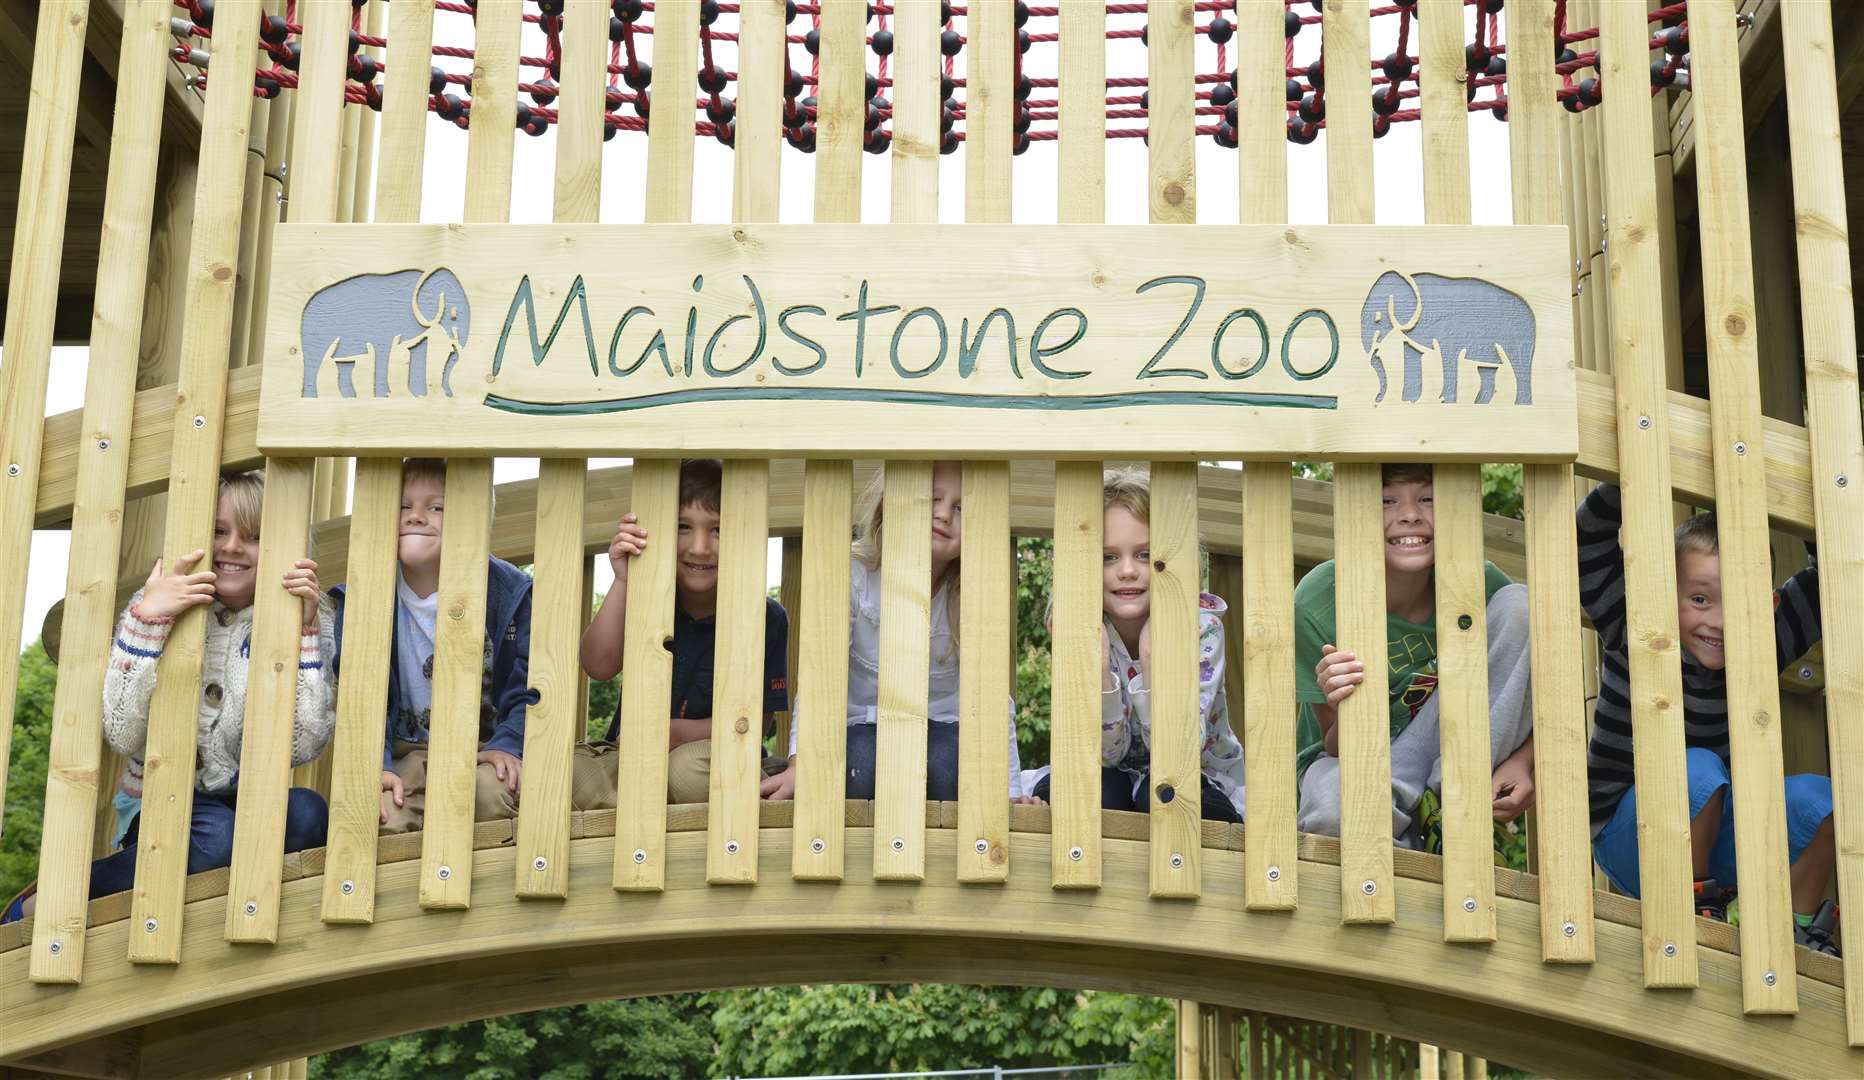 A play park has been opened on the site of Maidstone Zoo Picture: Martin Apps